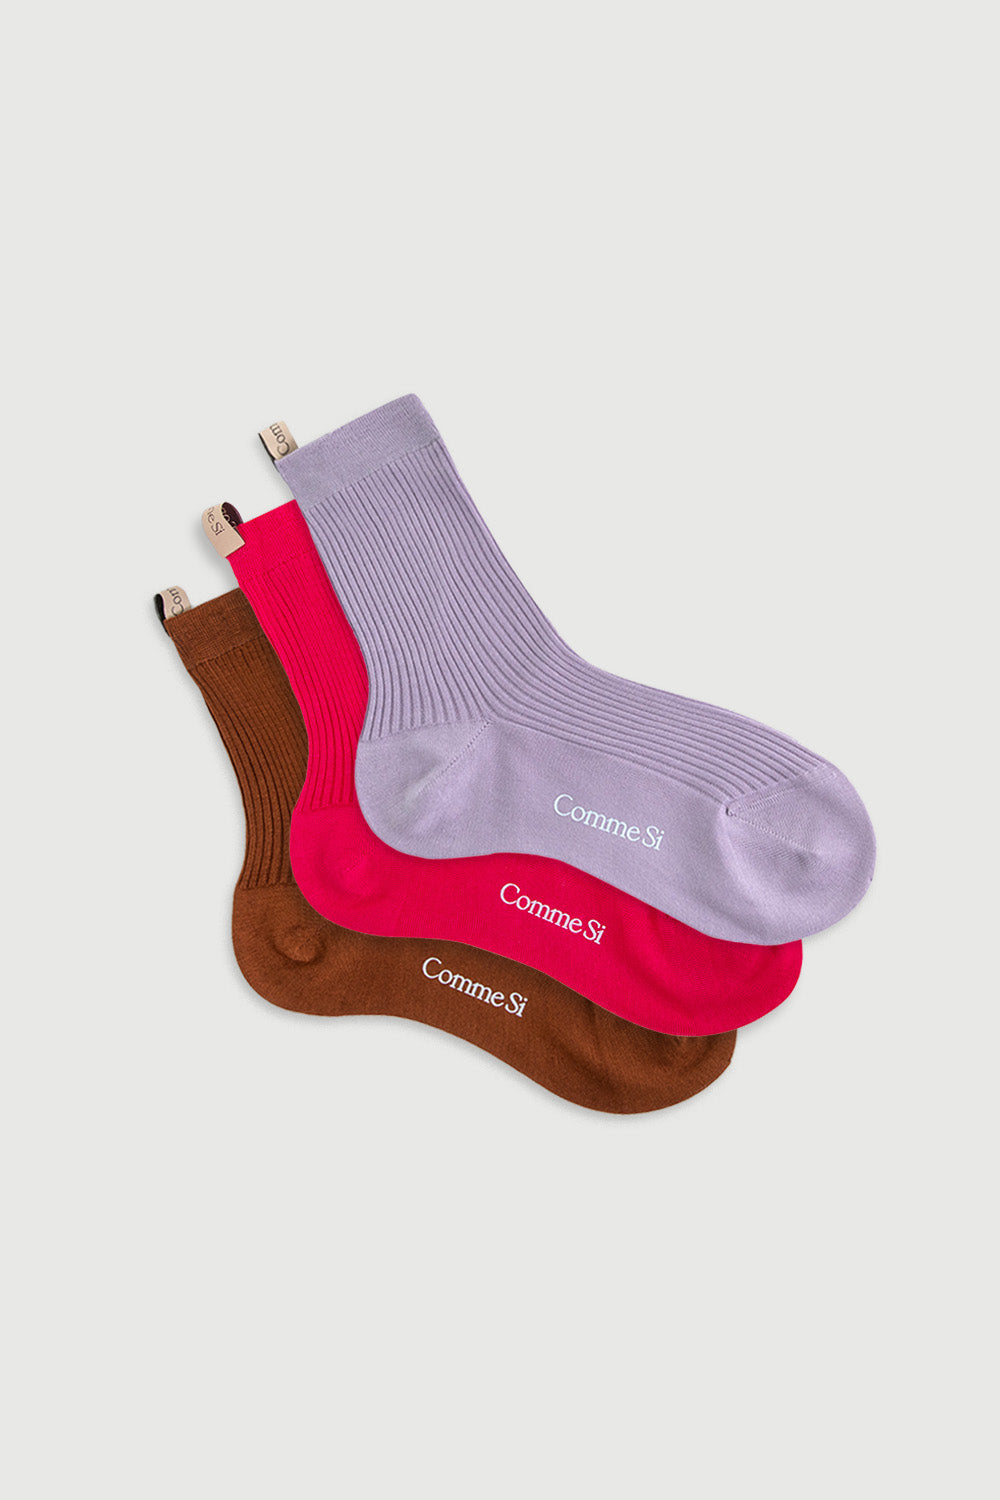 The Agnelli Trio, Egyptian Cotton Sock Set of three pairs in flora, by Comme Si